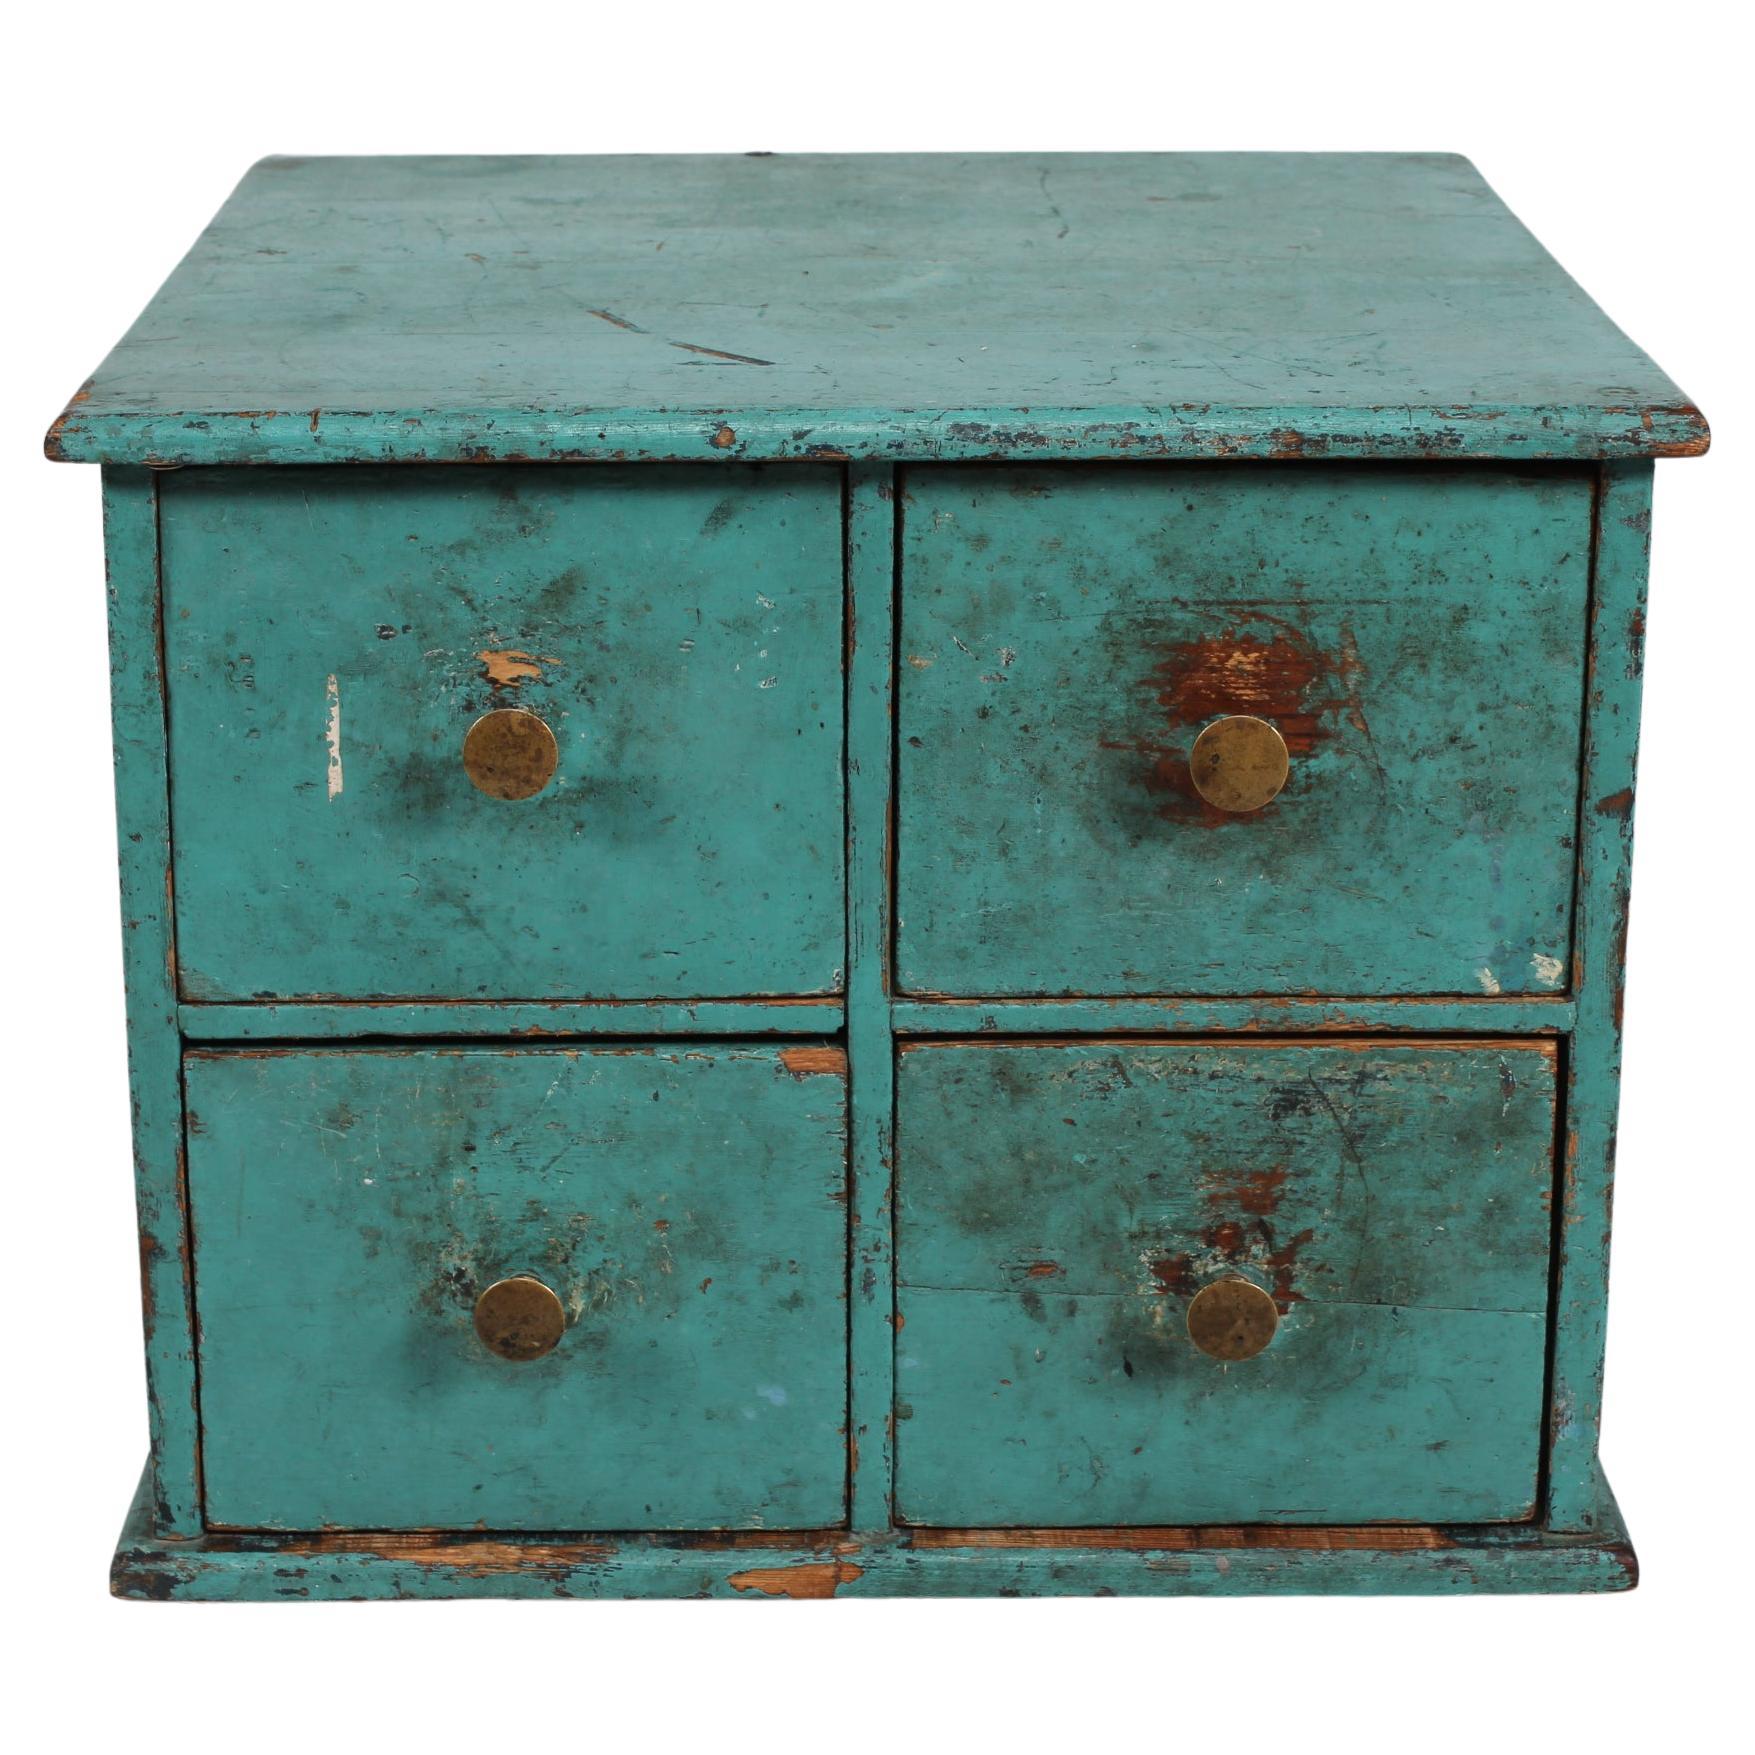 Small antique Swedish chest of drawers/ filing cabinet made of solid pine with turquoise/petroleum green paint patinated from wear and tear.
The small chest of drawers has four drawers with brass knobs. 
Made in the late 19th century